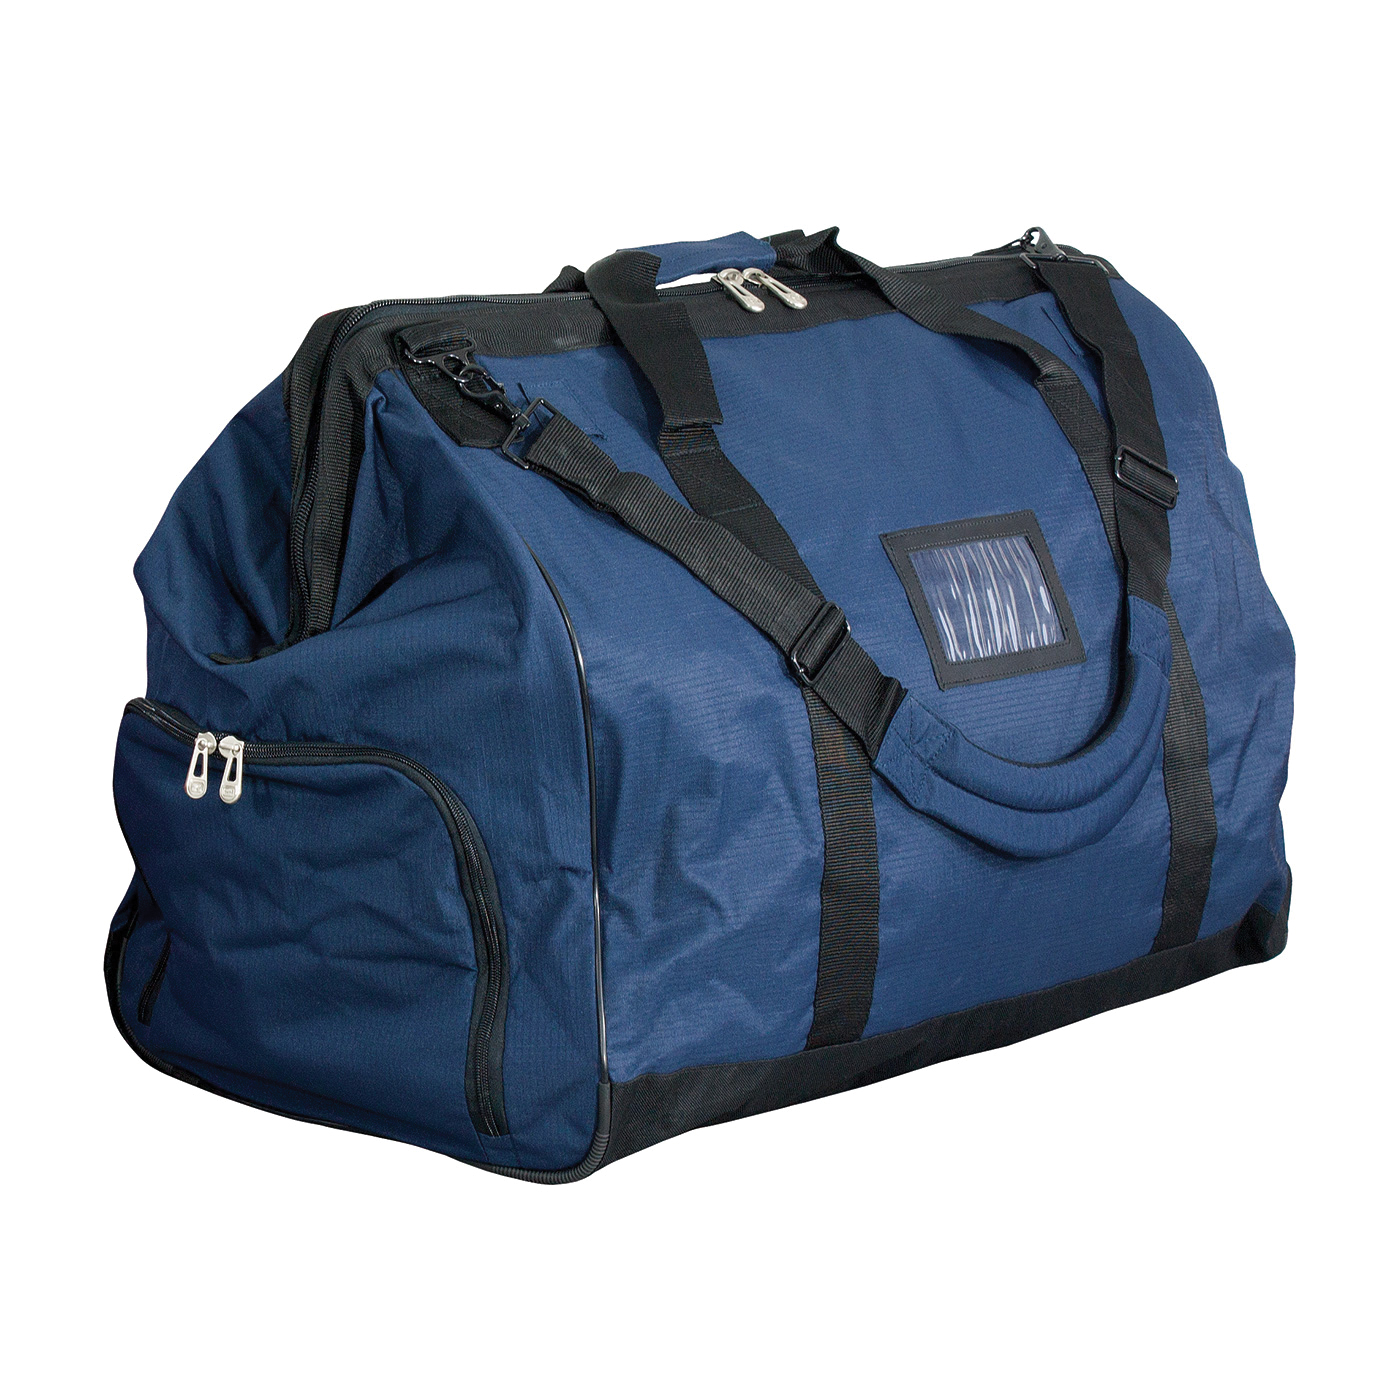 PIP® 903-GB652 Gear Bag, Blue, Polyester, 22 in H x 16-1/2 in W x 28 in D